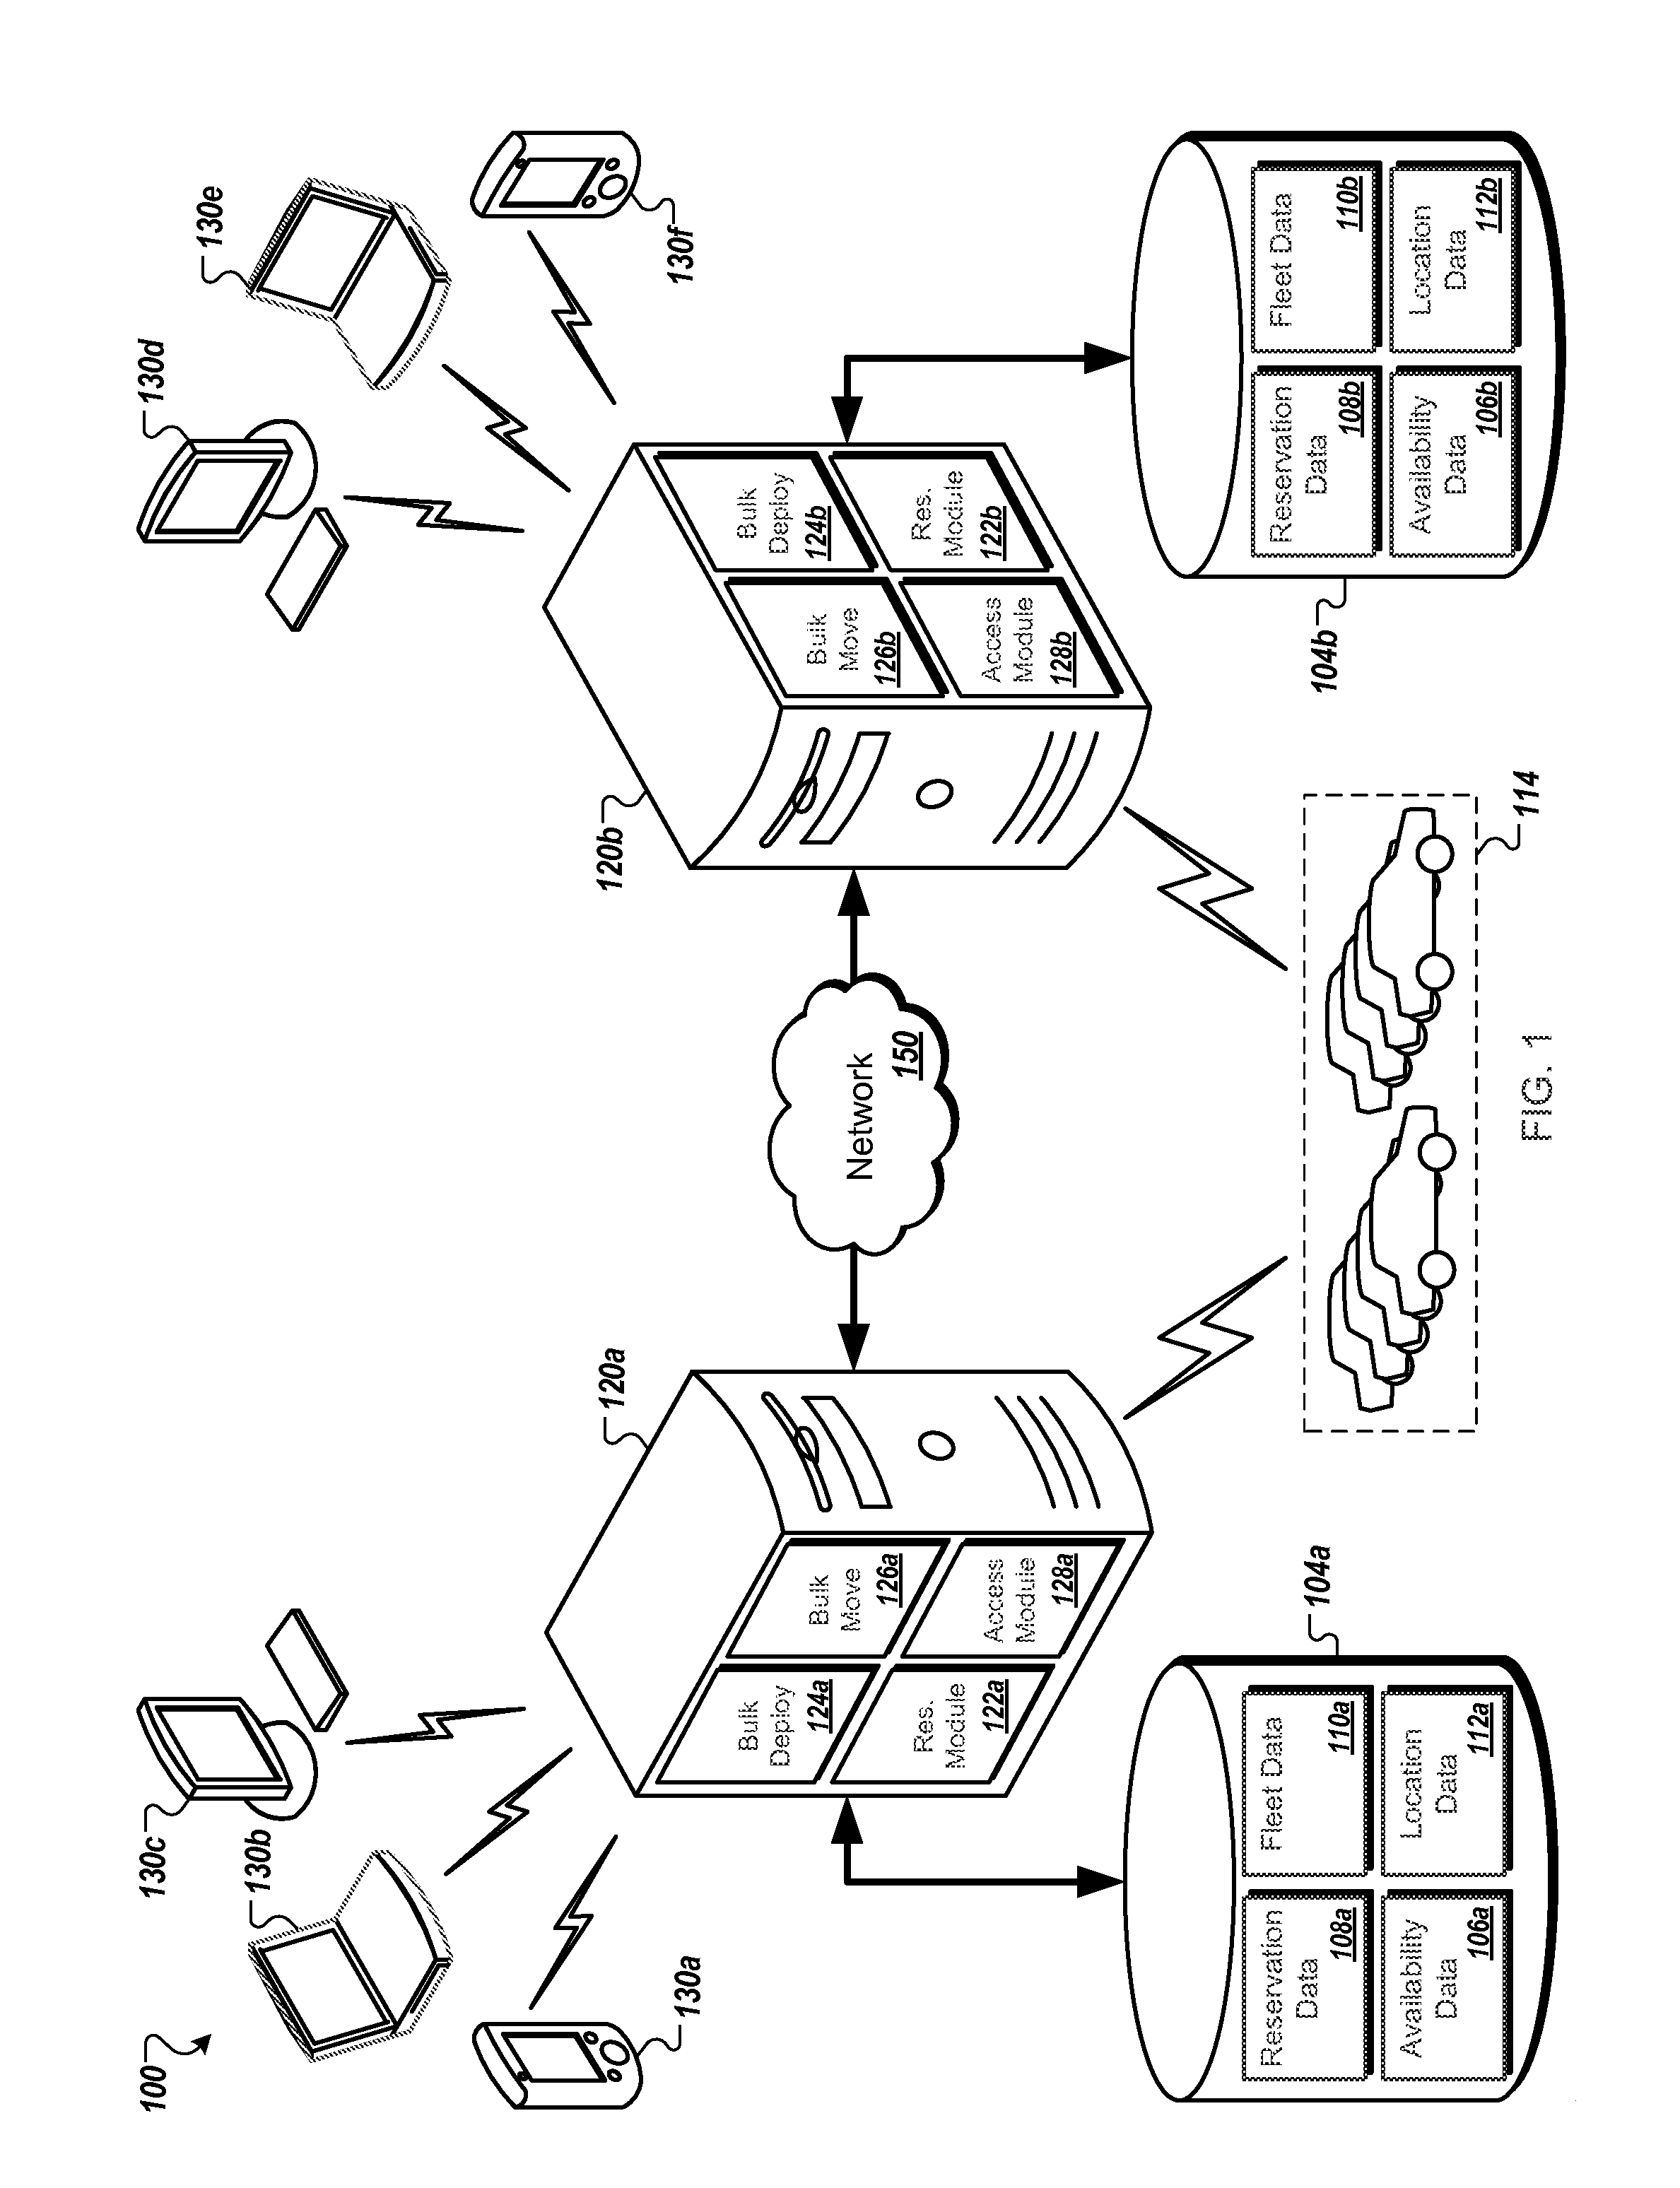 Systems and methods for vehicle fleet sharing